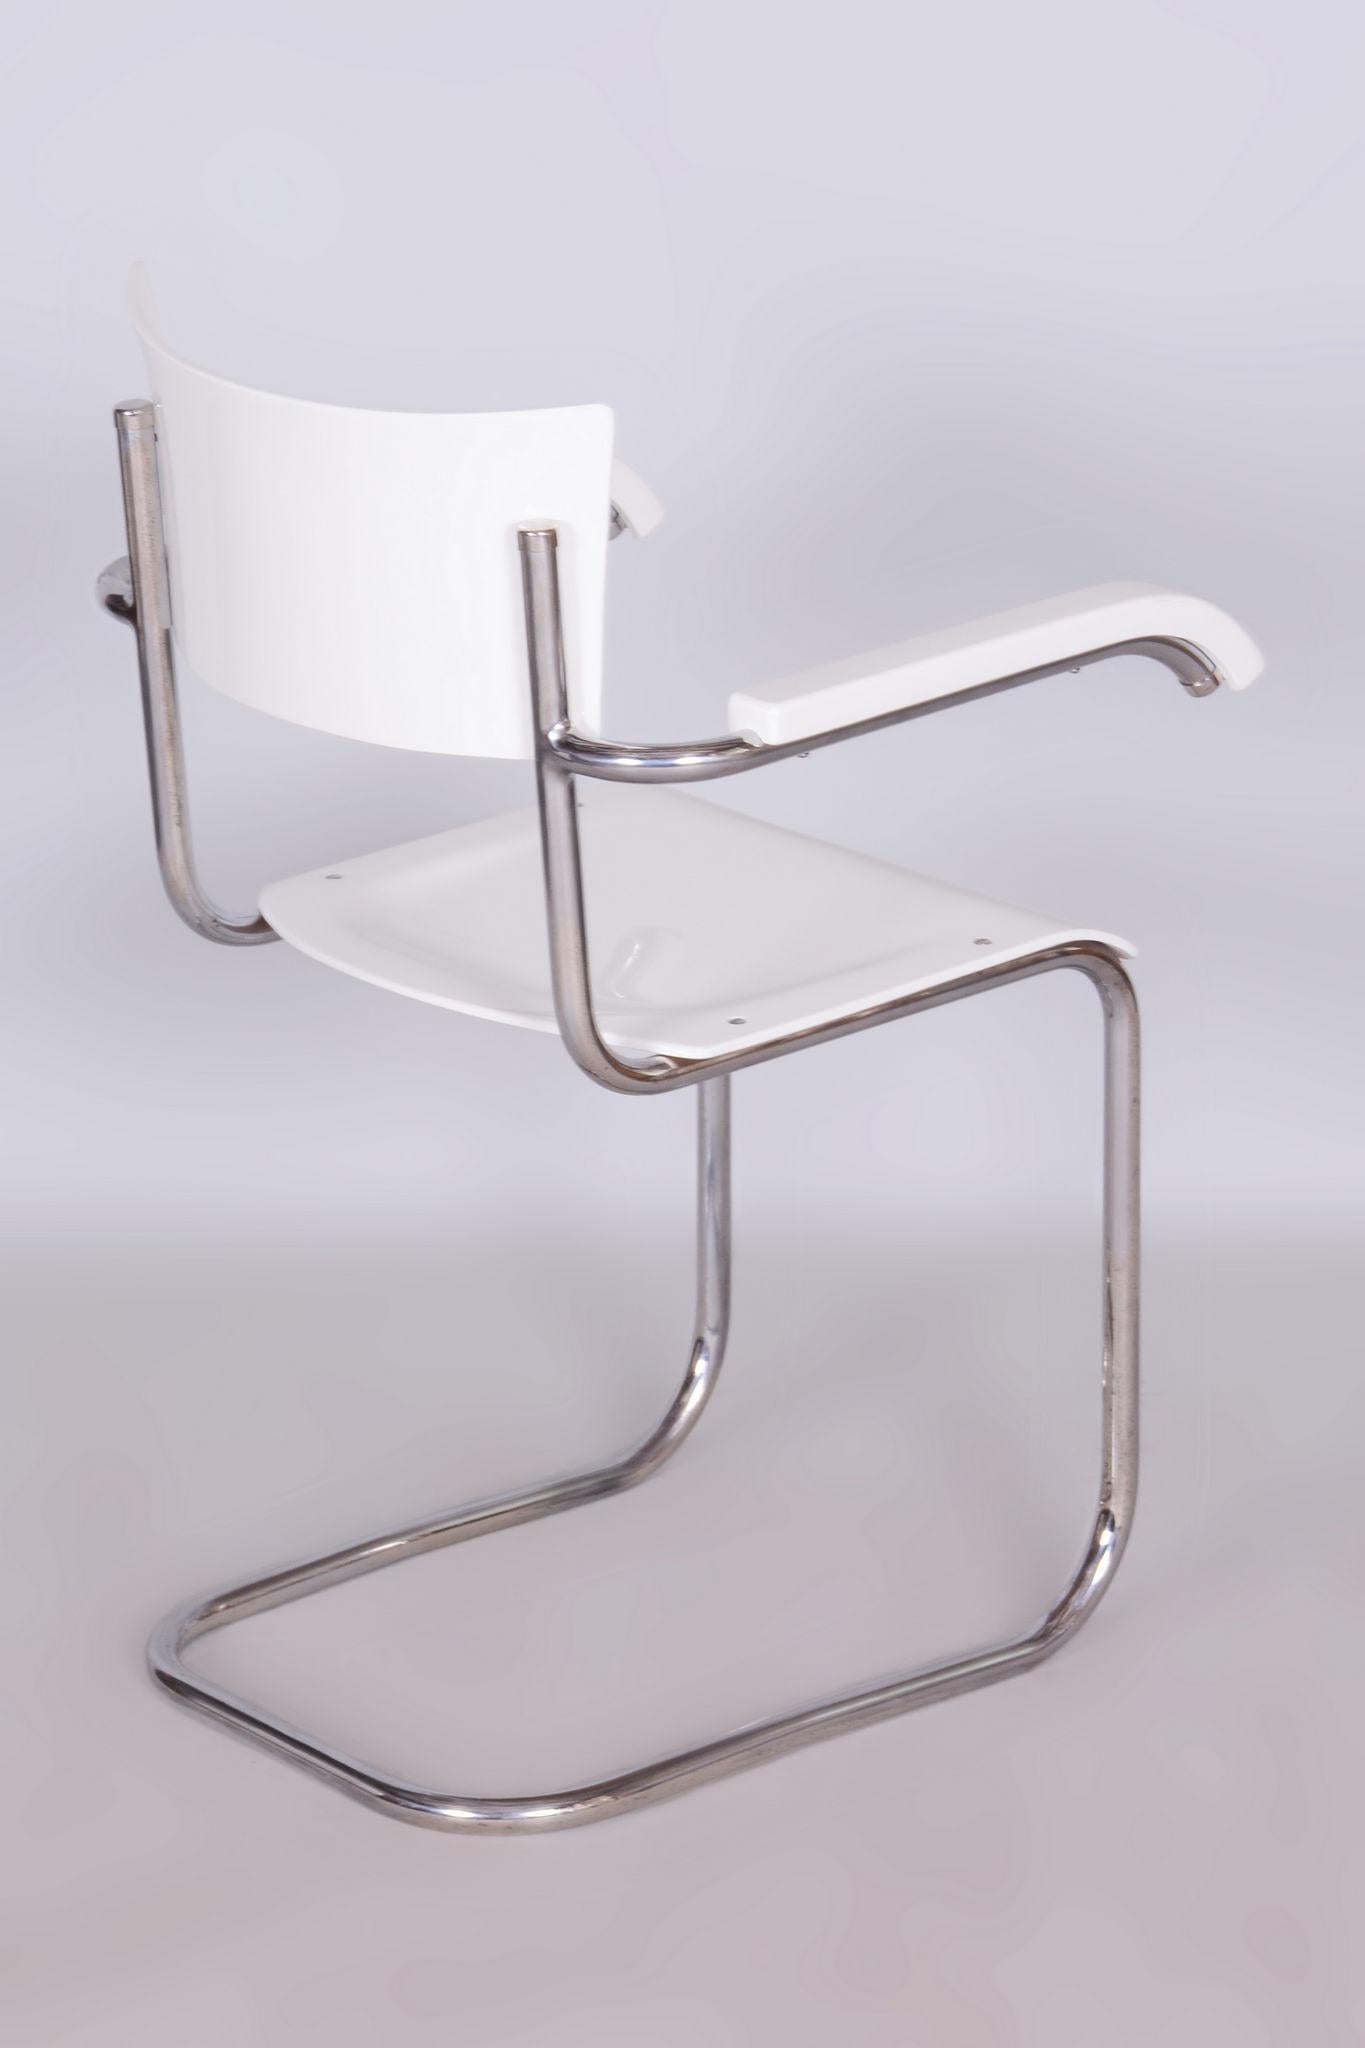 Restored Bauhaus Pair of Chairs, by Mart Stam, Chrome, Germany, 1930s For Sale 2